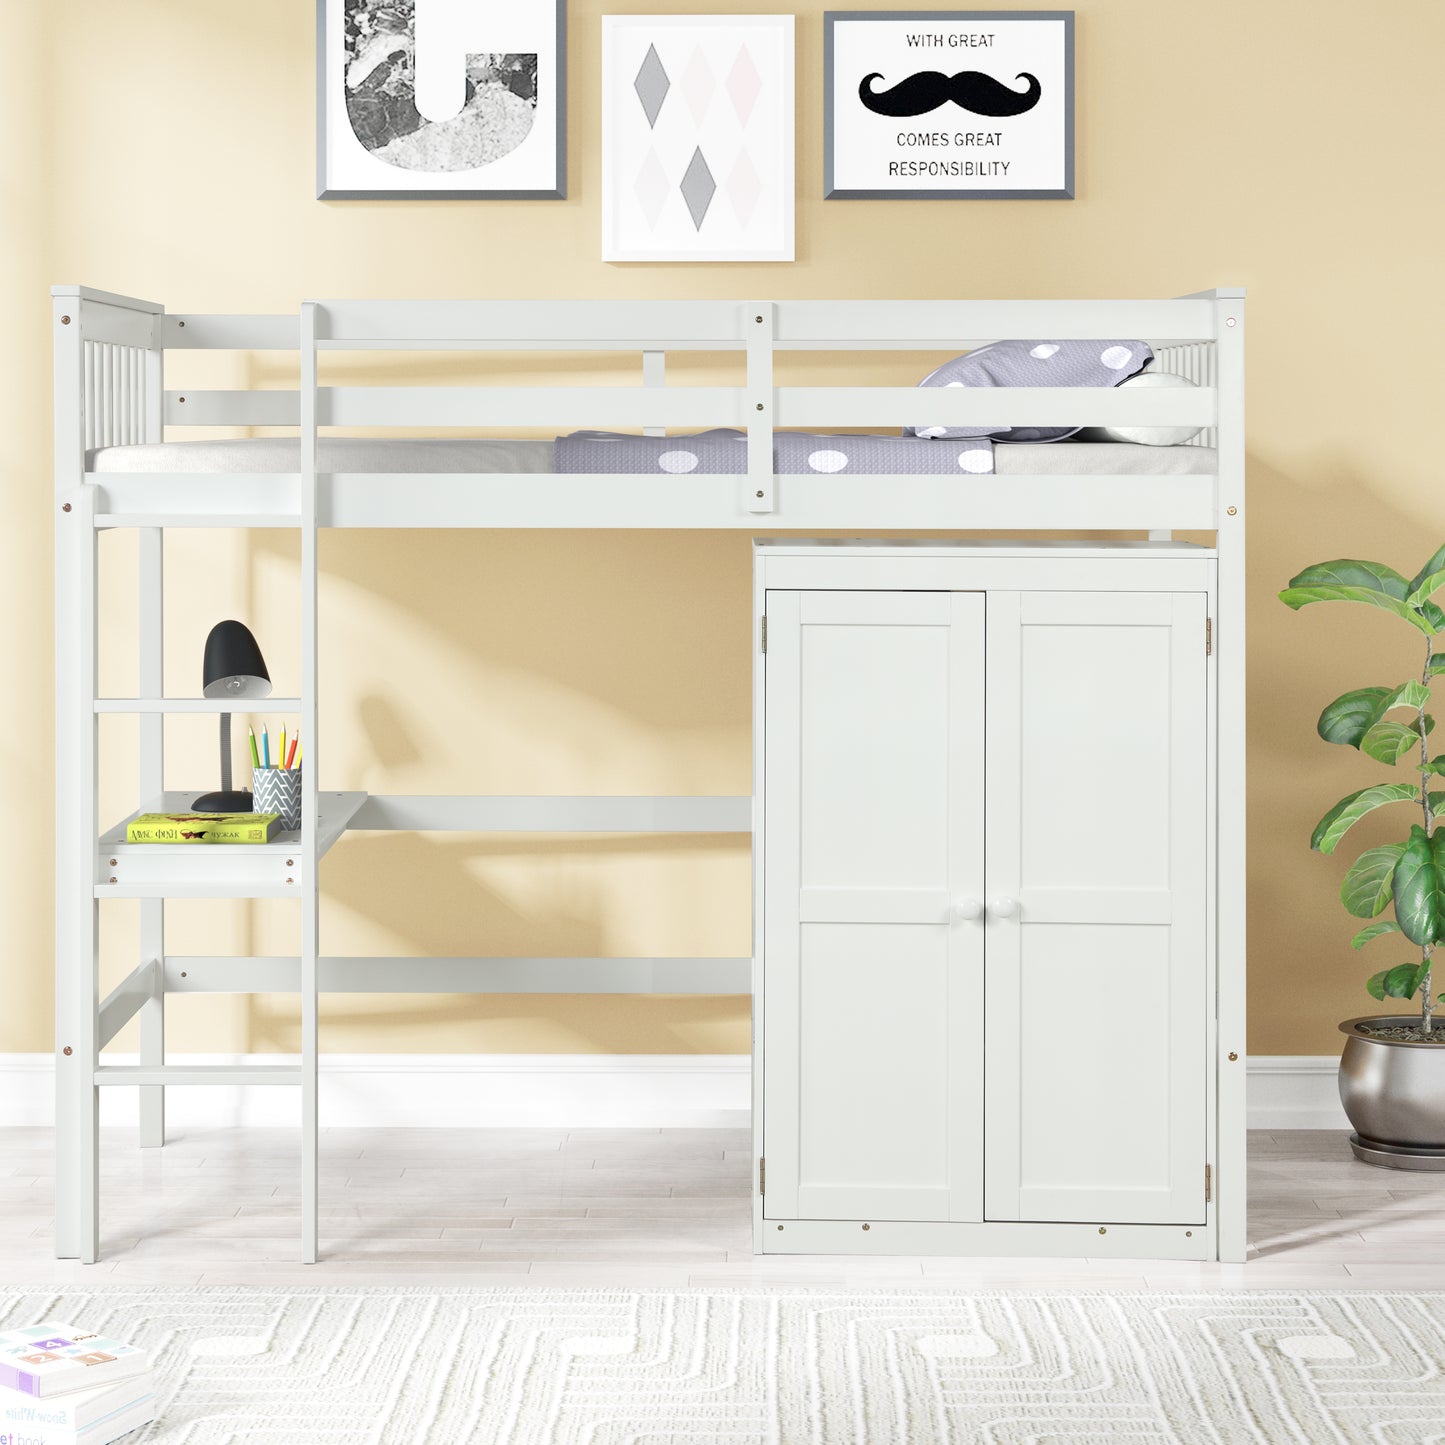 TWIN LOFT BED WITH DESK AND WARDROBE FOR WHITE COLOR